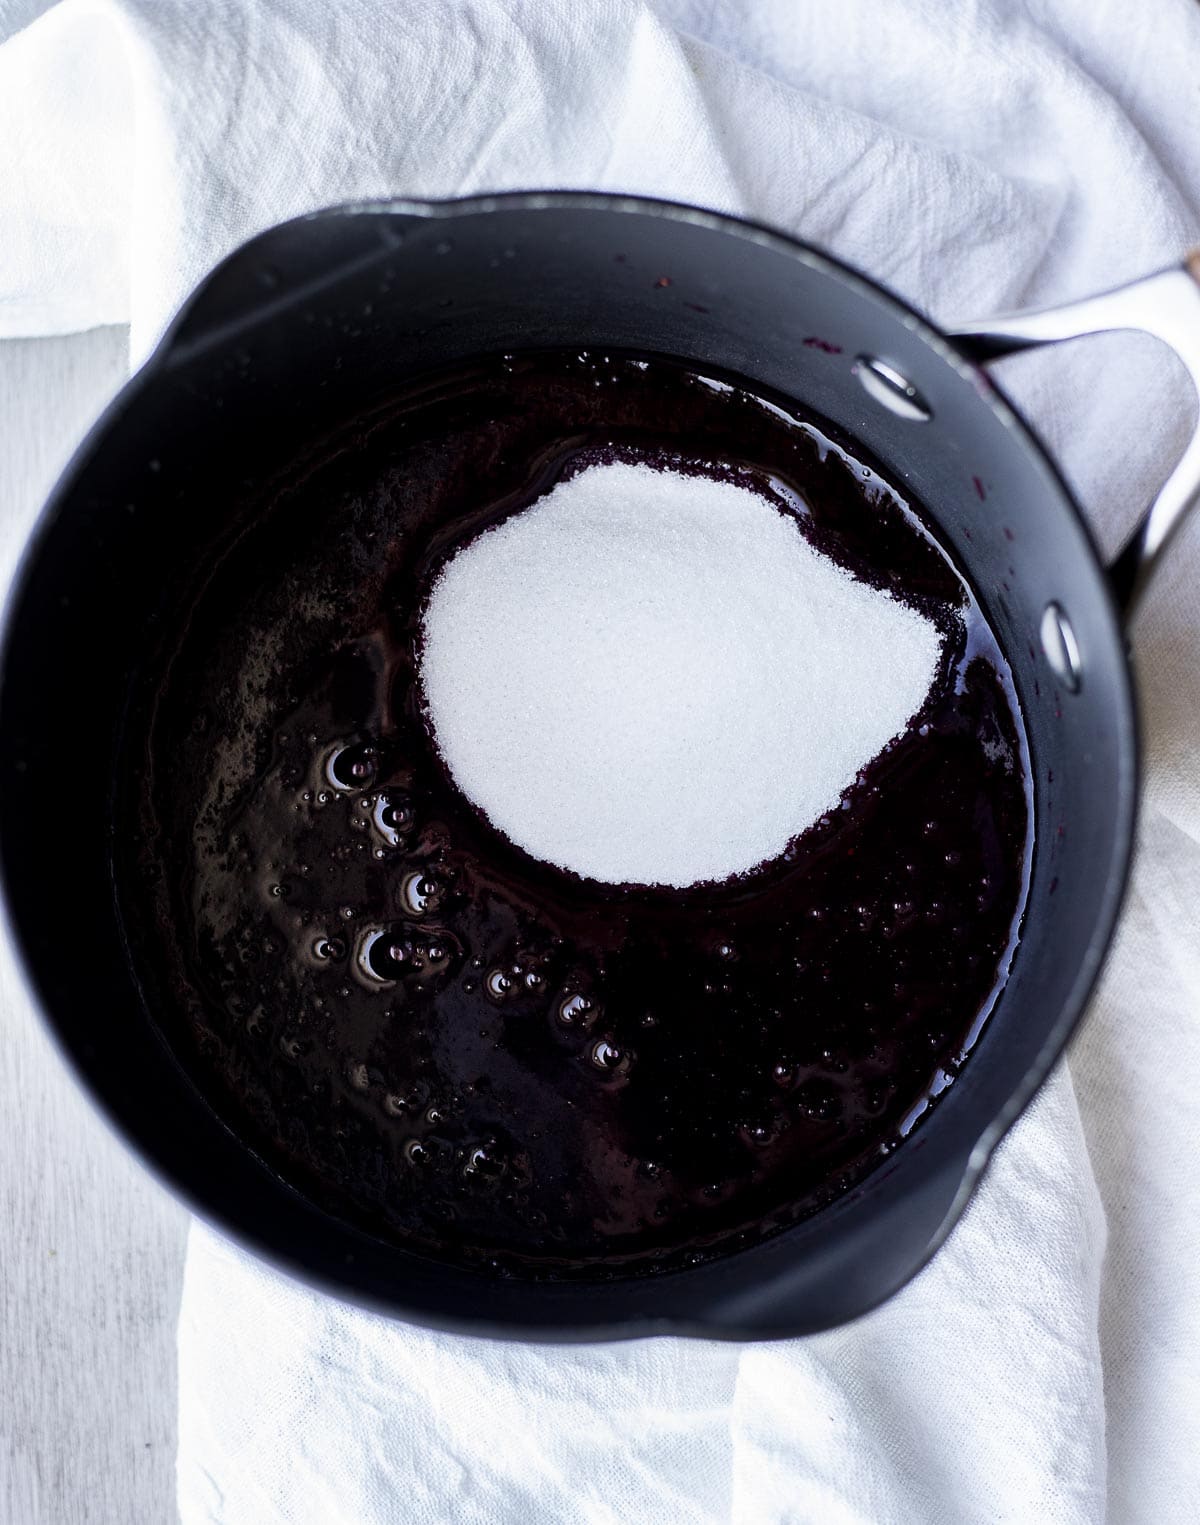 Sugar added to the blueberry mixture in a sauce pan.